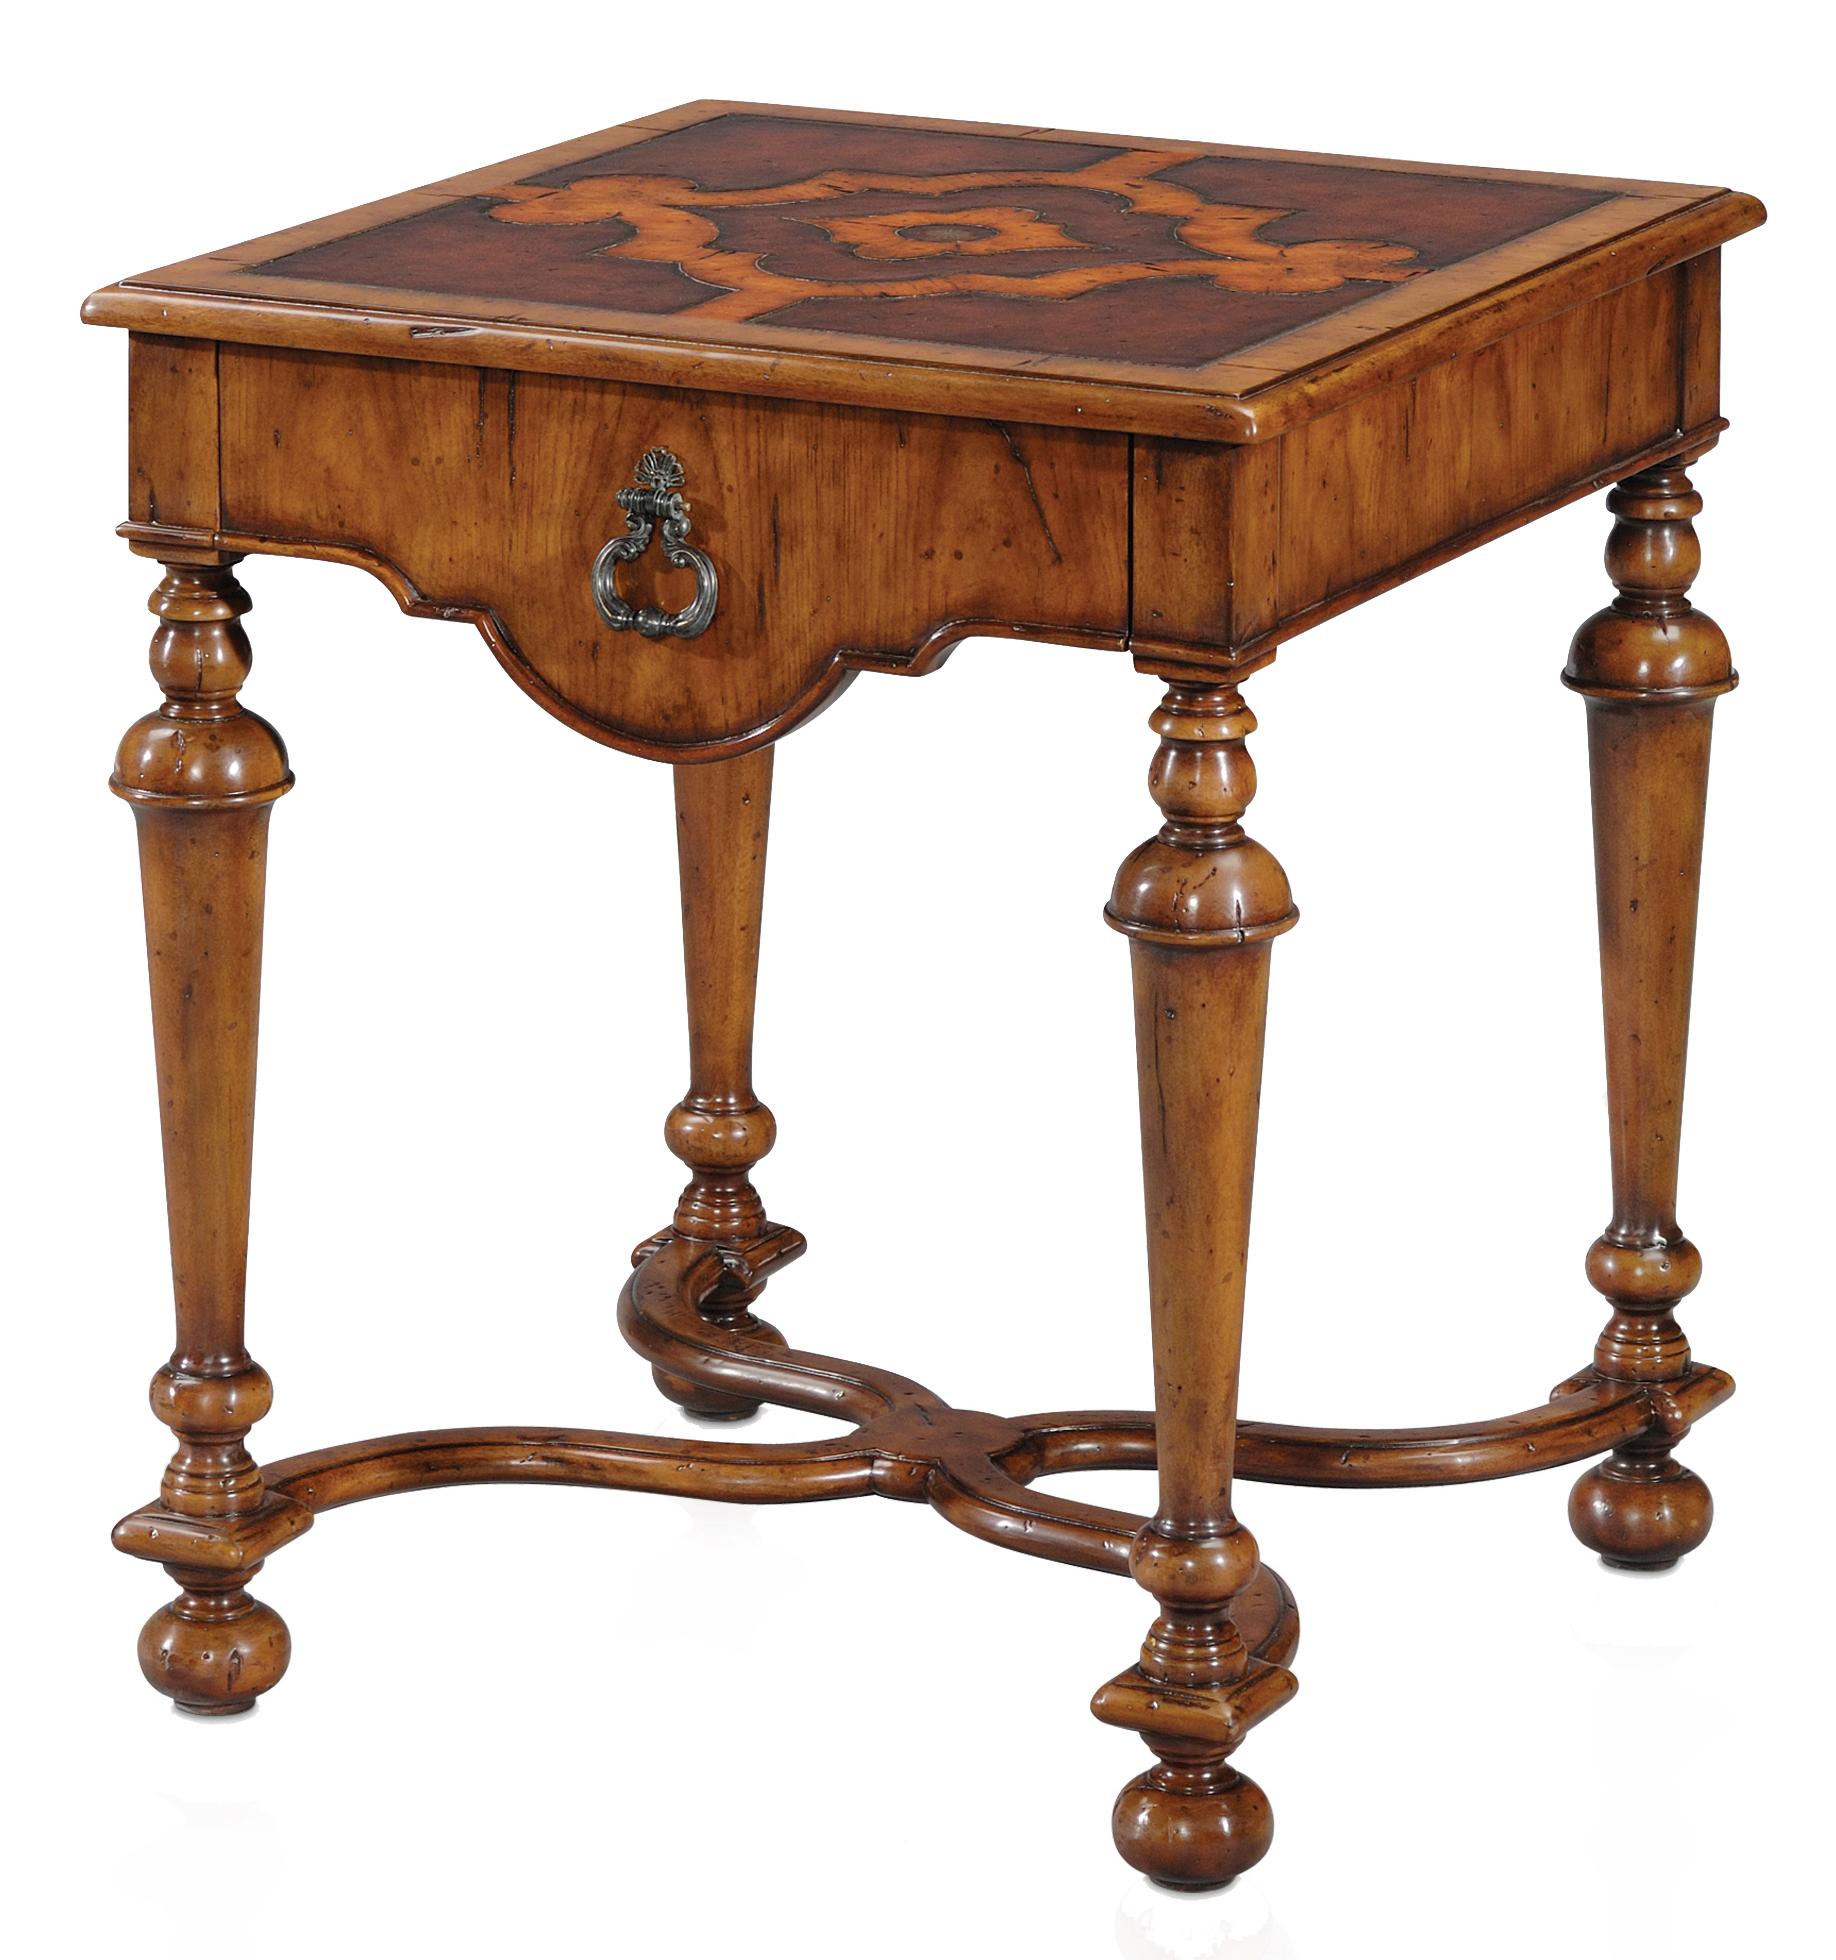 Mary's Square Lamp Table with Top Drawer